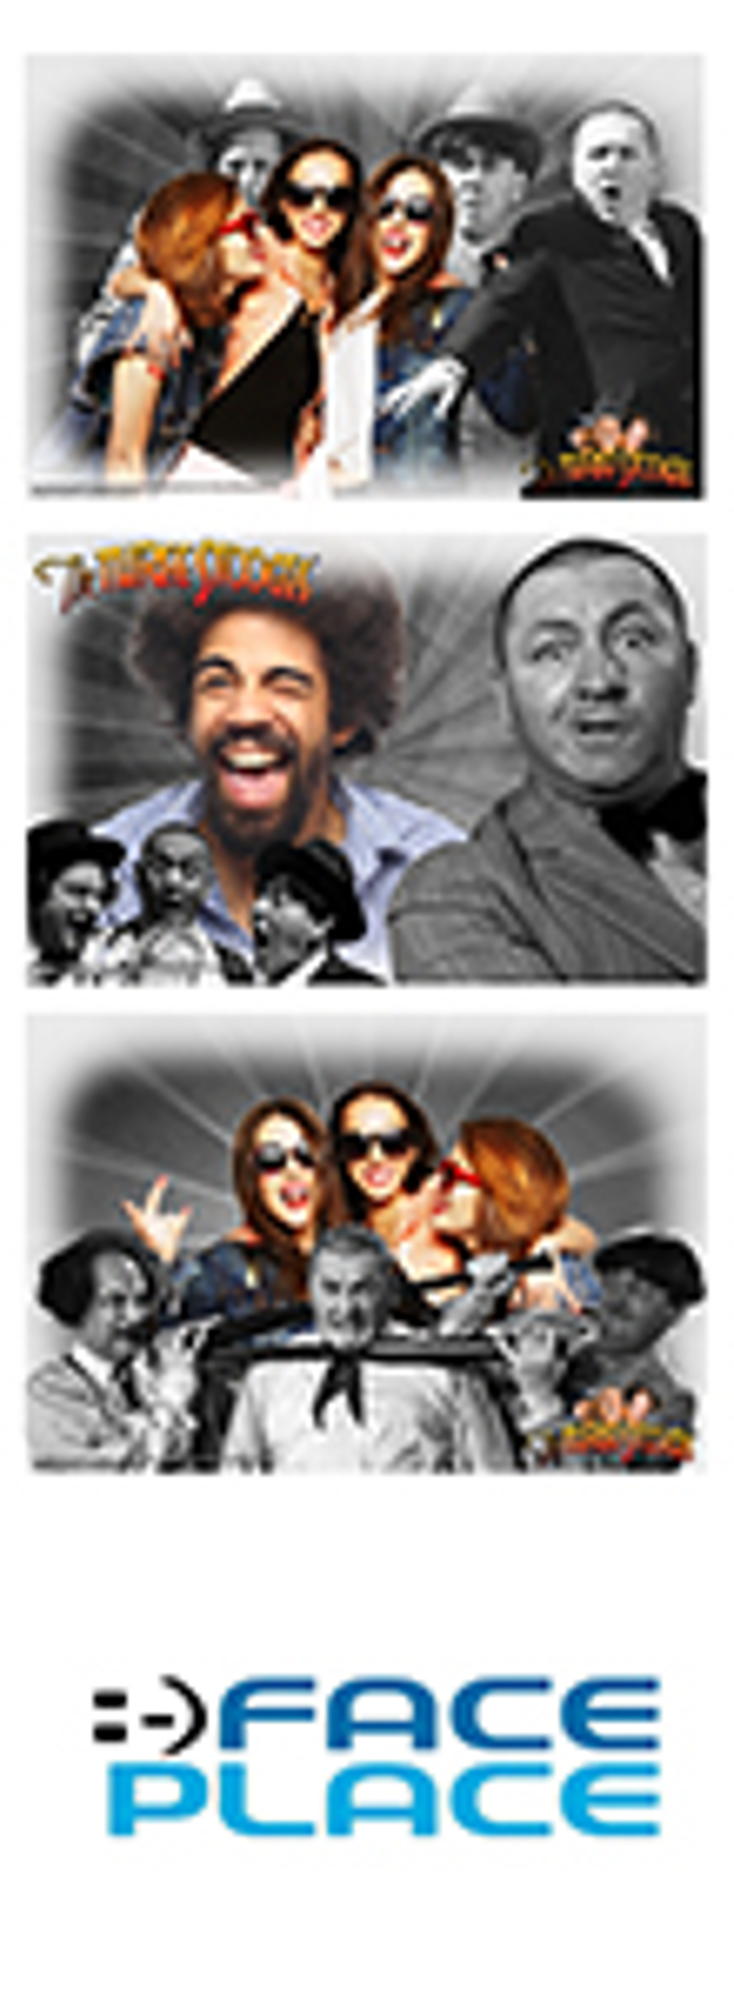 C3 Adds Three Stooges Digital Photo Booths